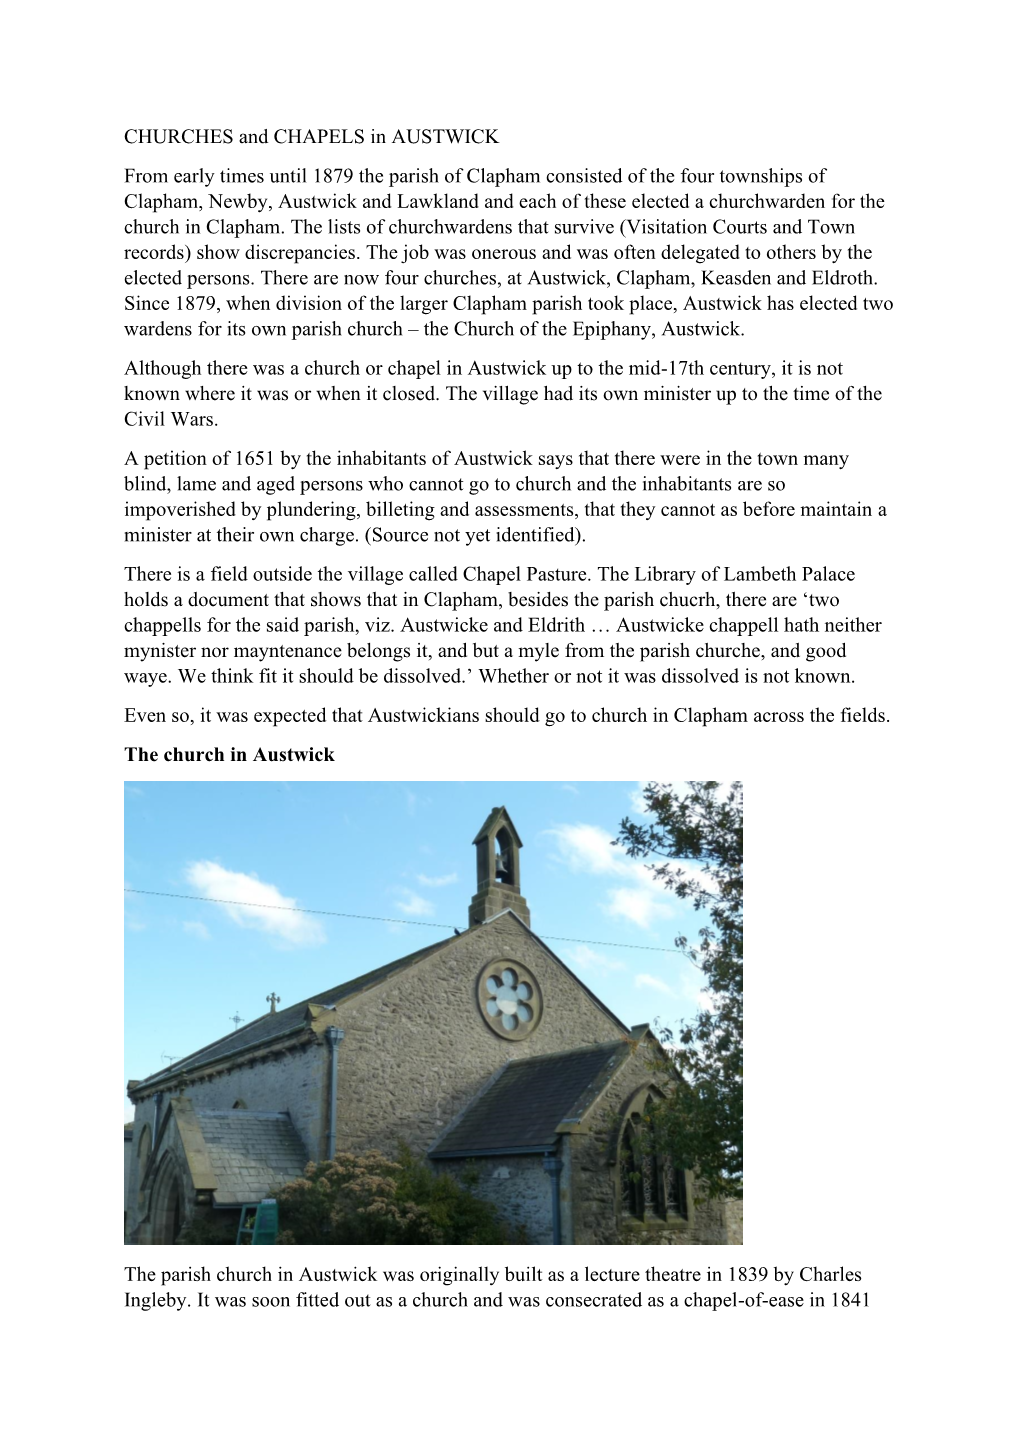 CHURCHES and CHAPELS in AUSTWICK from Early Times Until